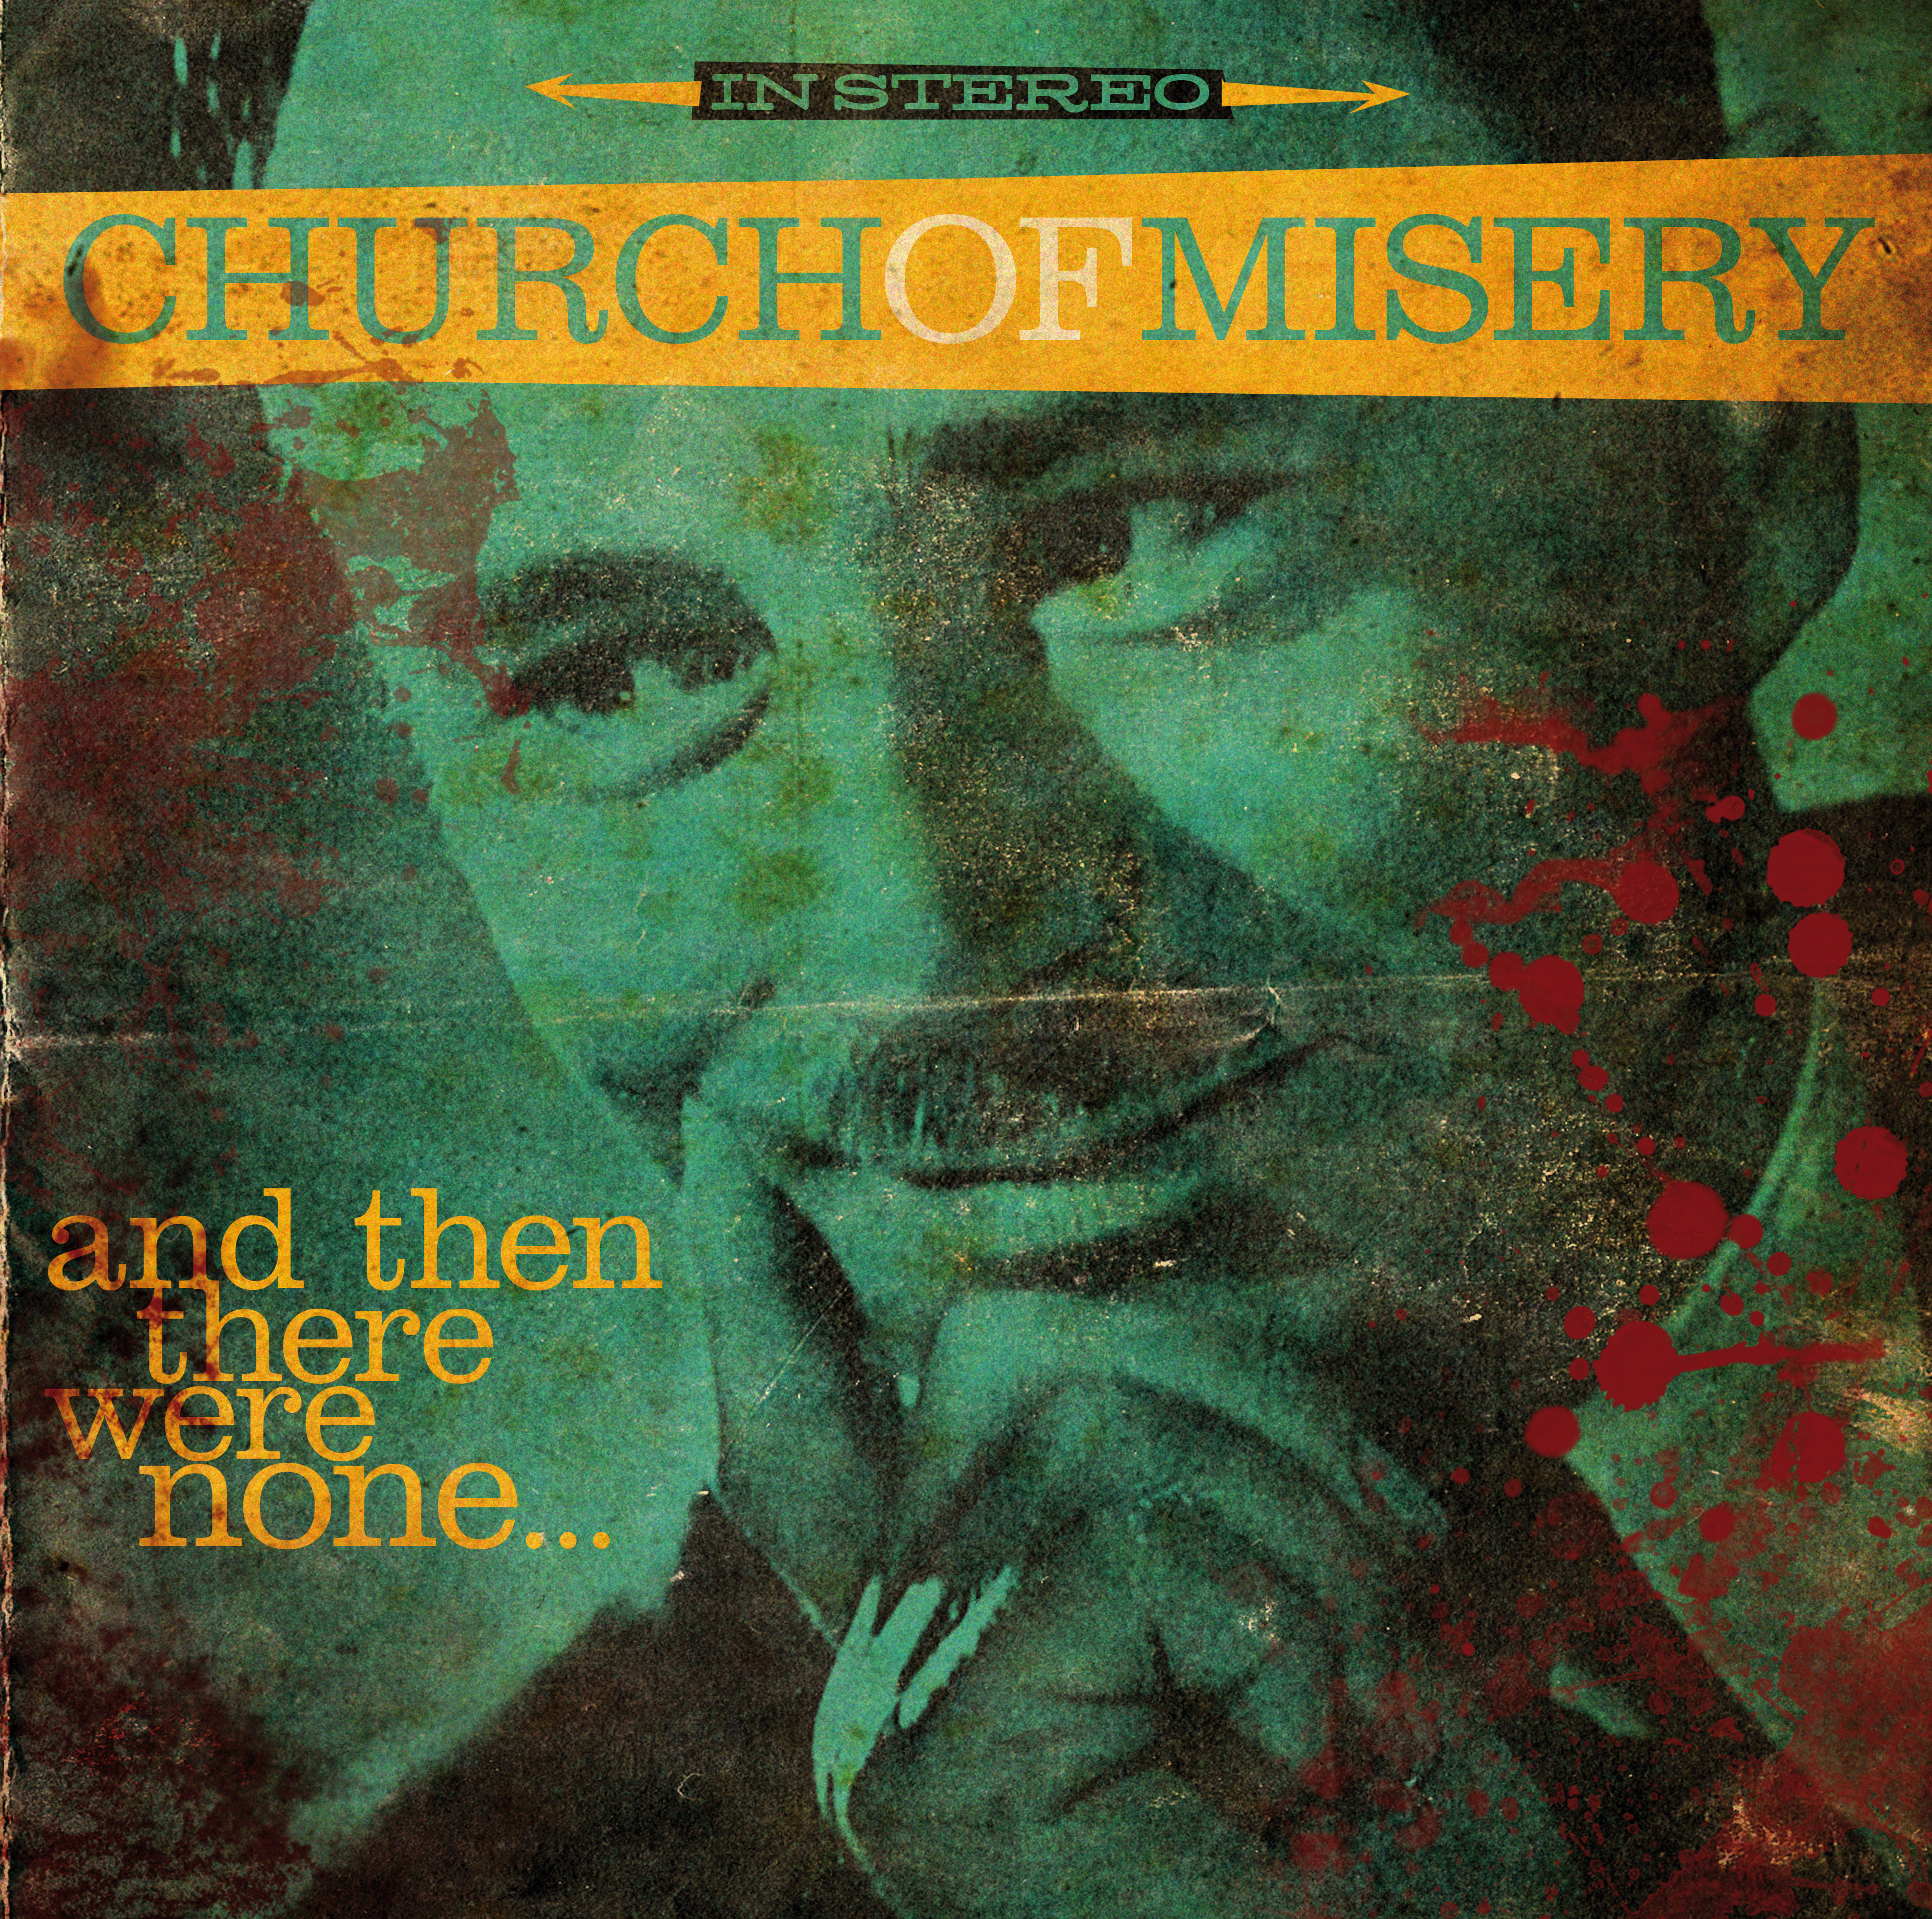 church-of-misery-and-then-there-were-none.jpg